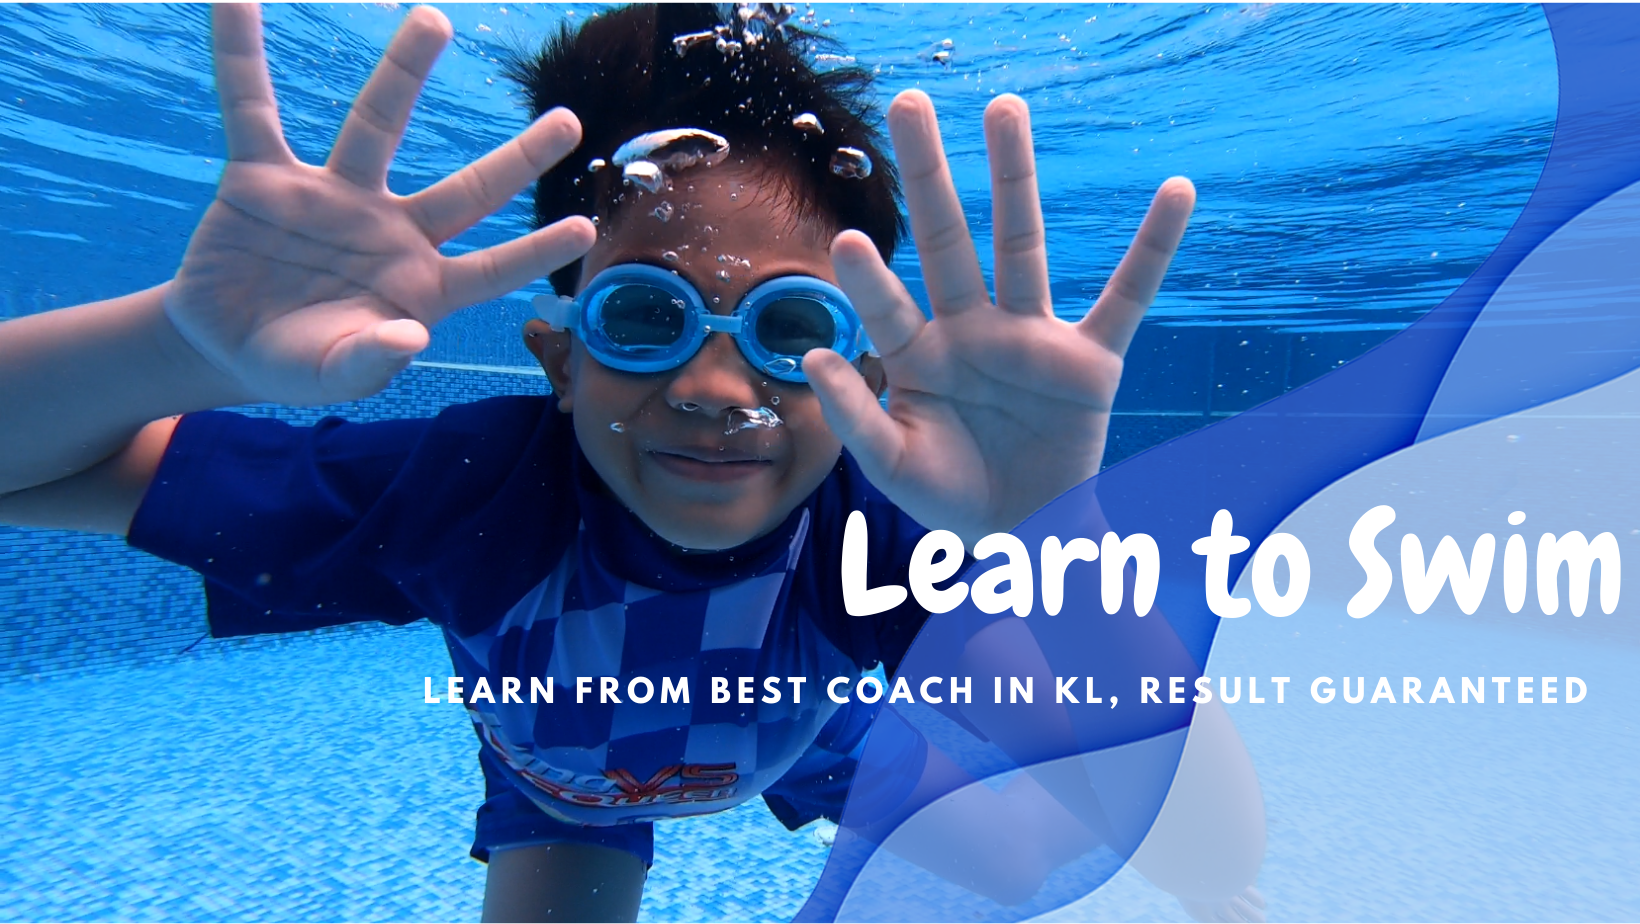 Onsite Private Toddler Swimming Lesson at Putrajaya by Swim Up Academy